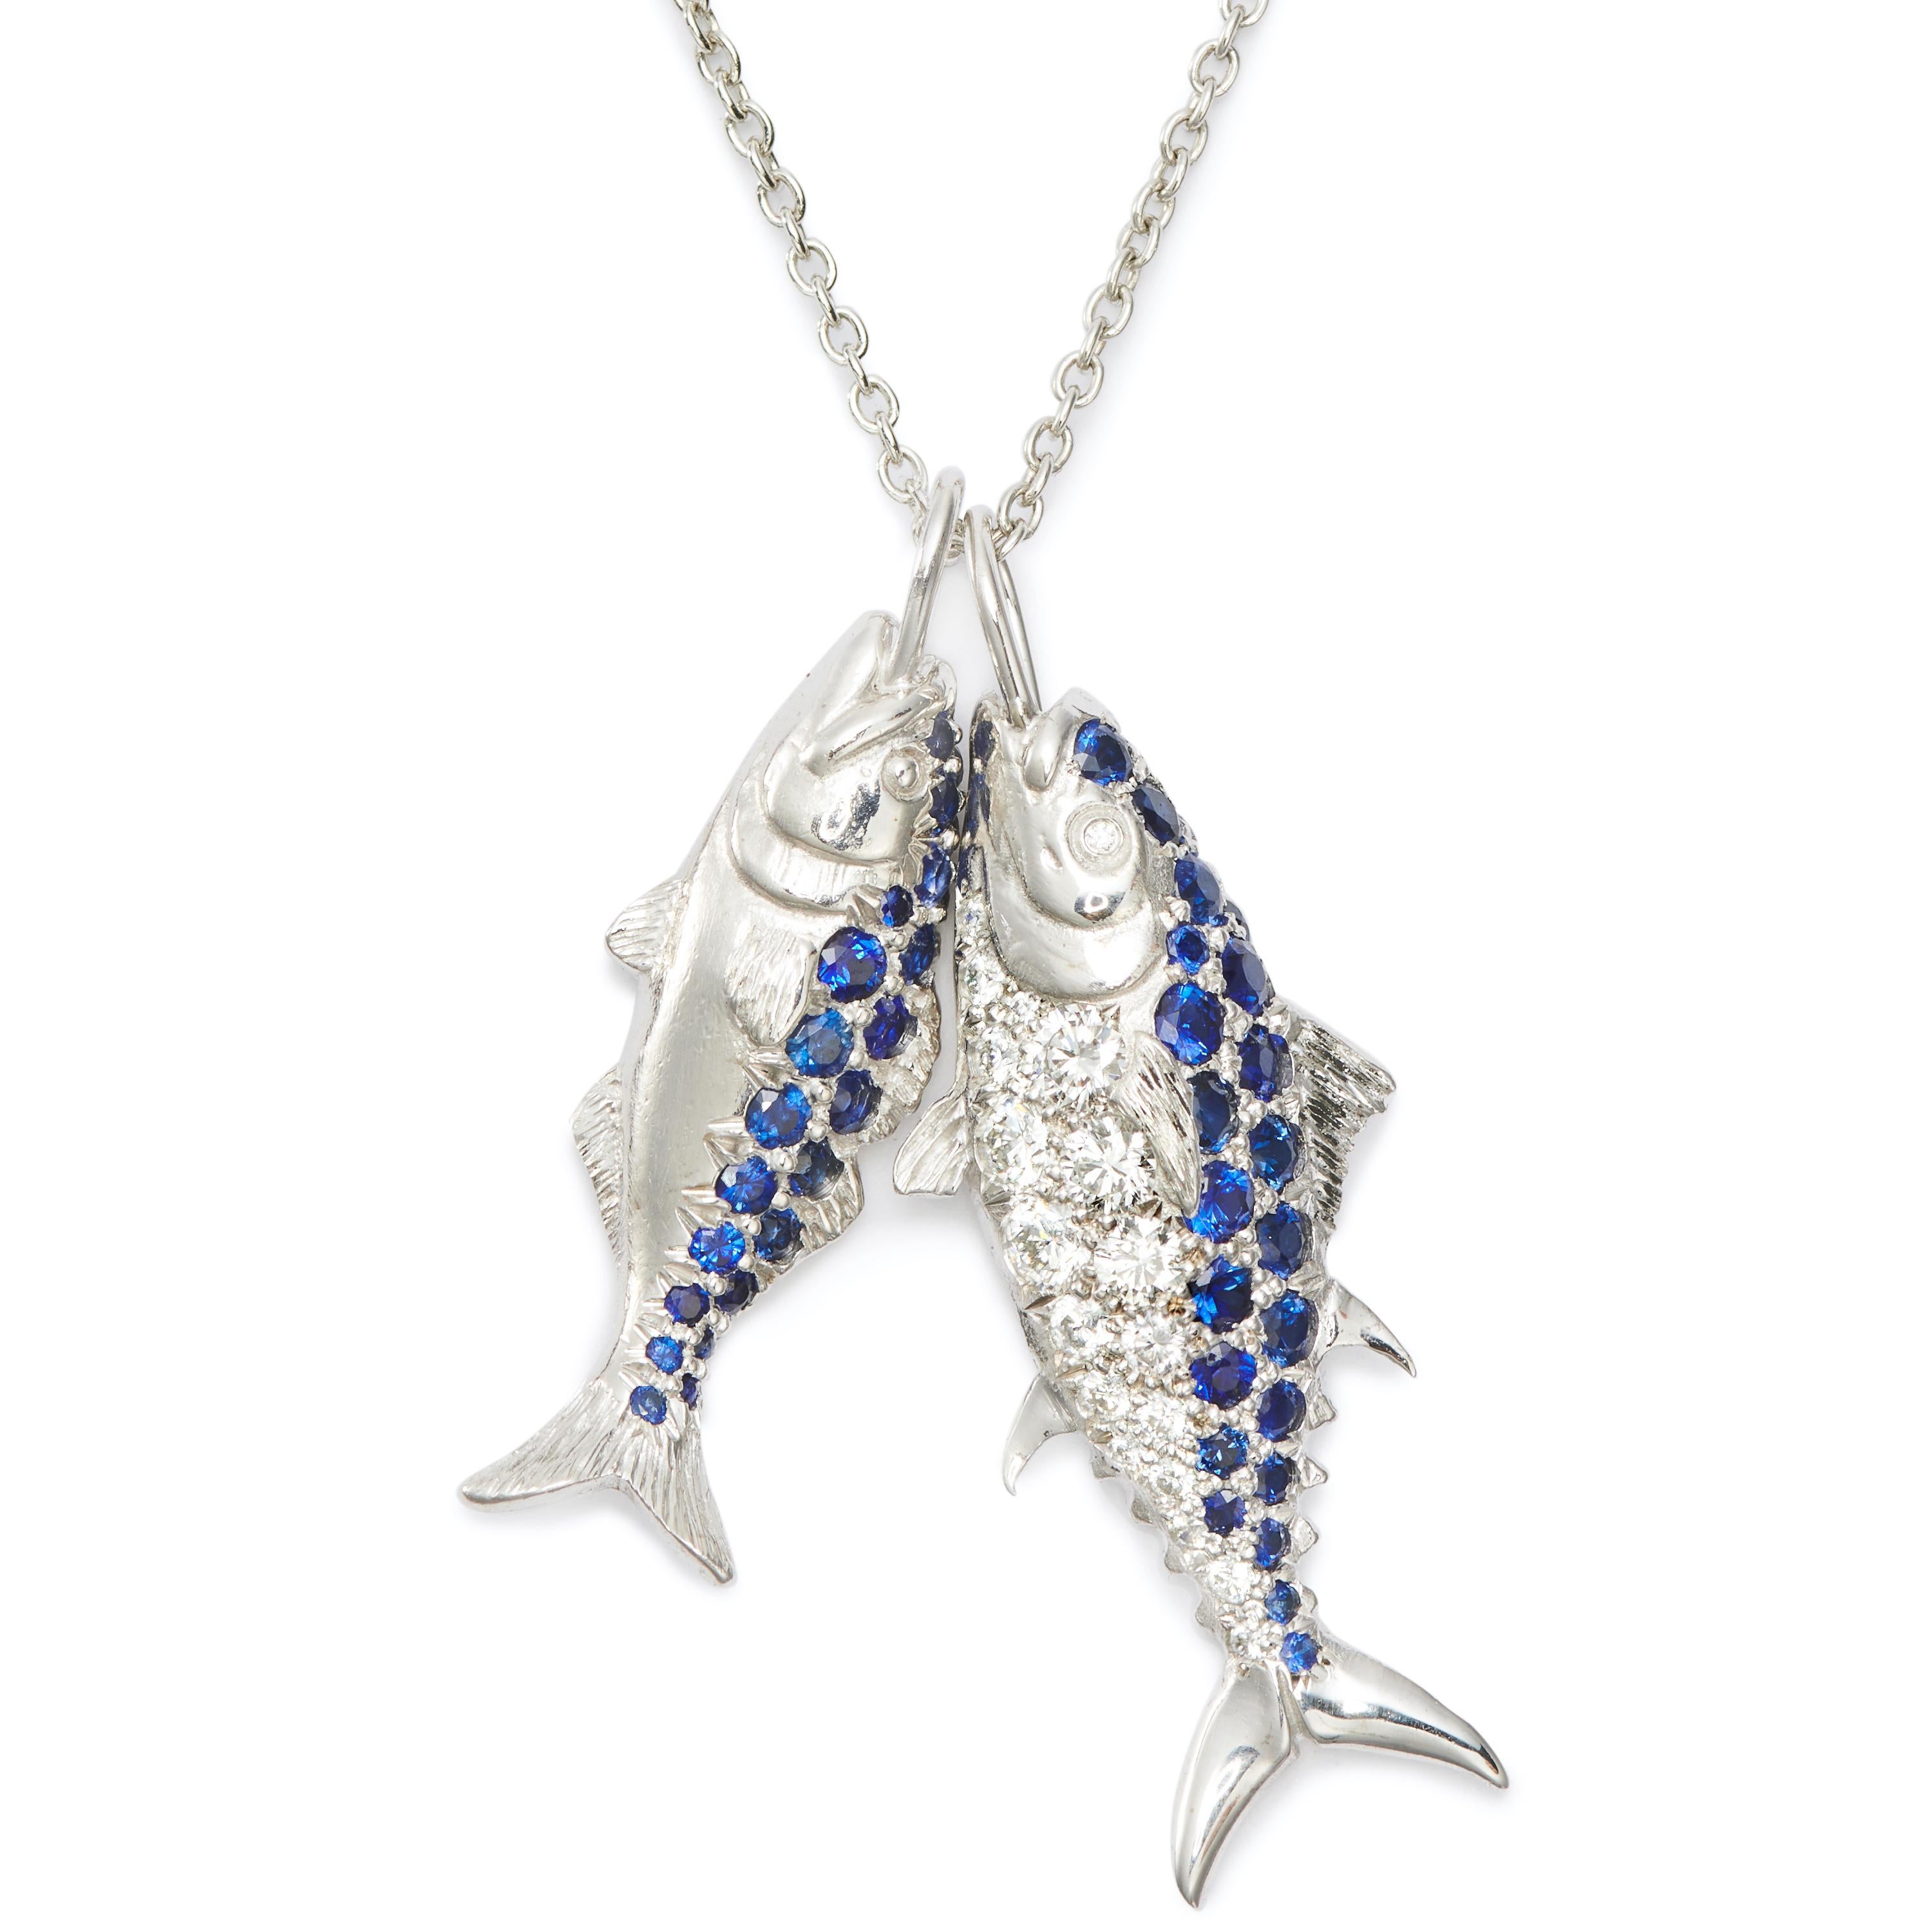 Contemporary Susan Lister Locke Nantucket Bluefish 0.61ct Sapphire and 18K White Gold Pendant For Sale